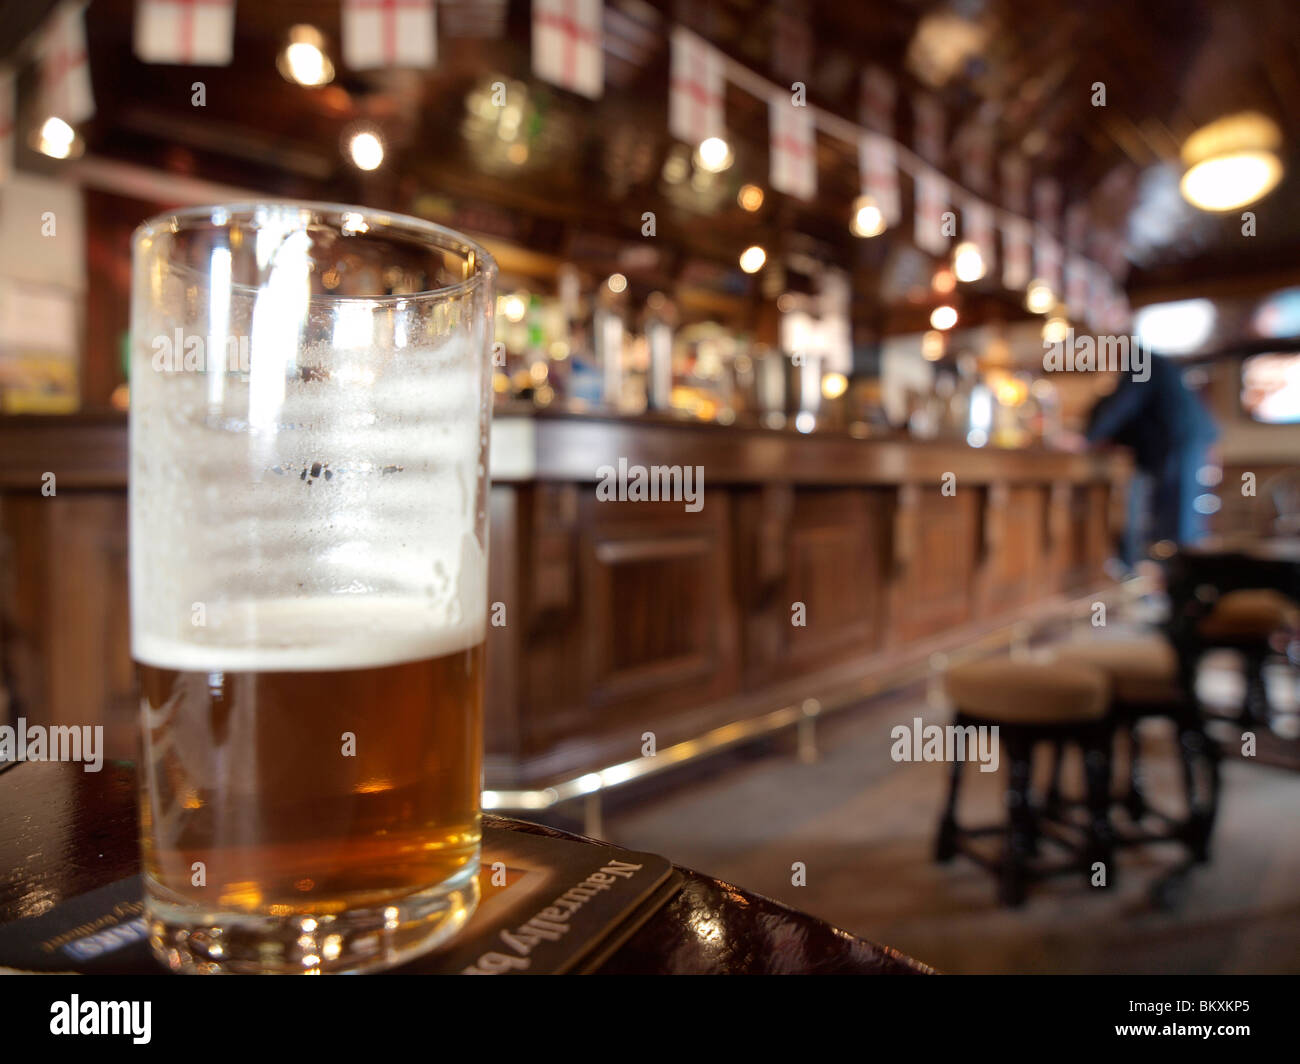 A half a pint at the Diamond pub in Ponteland, Northumberland. Glass is visible with the pub interior blurred Stock Photo